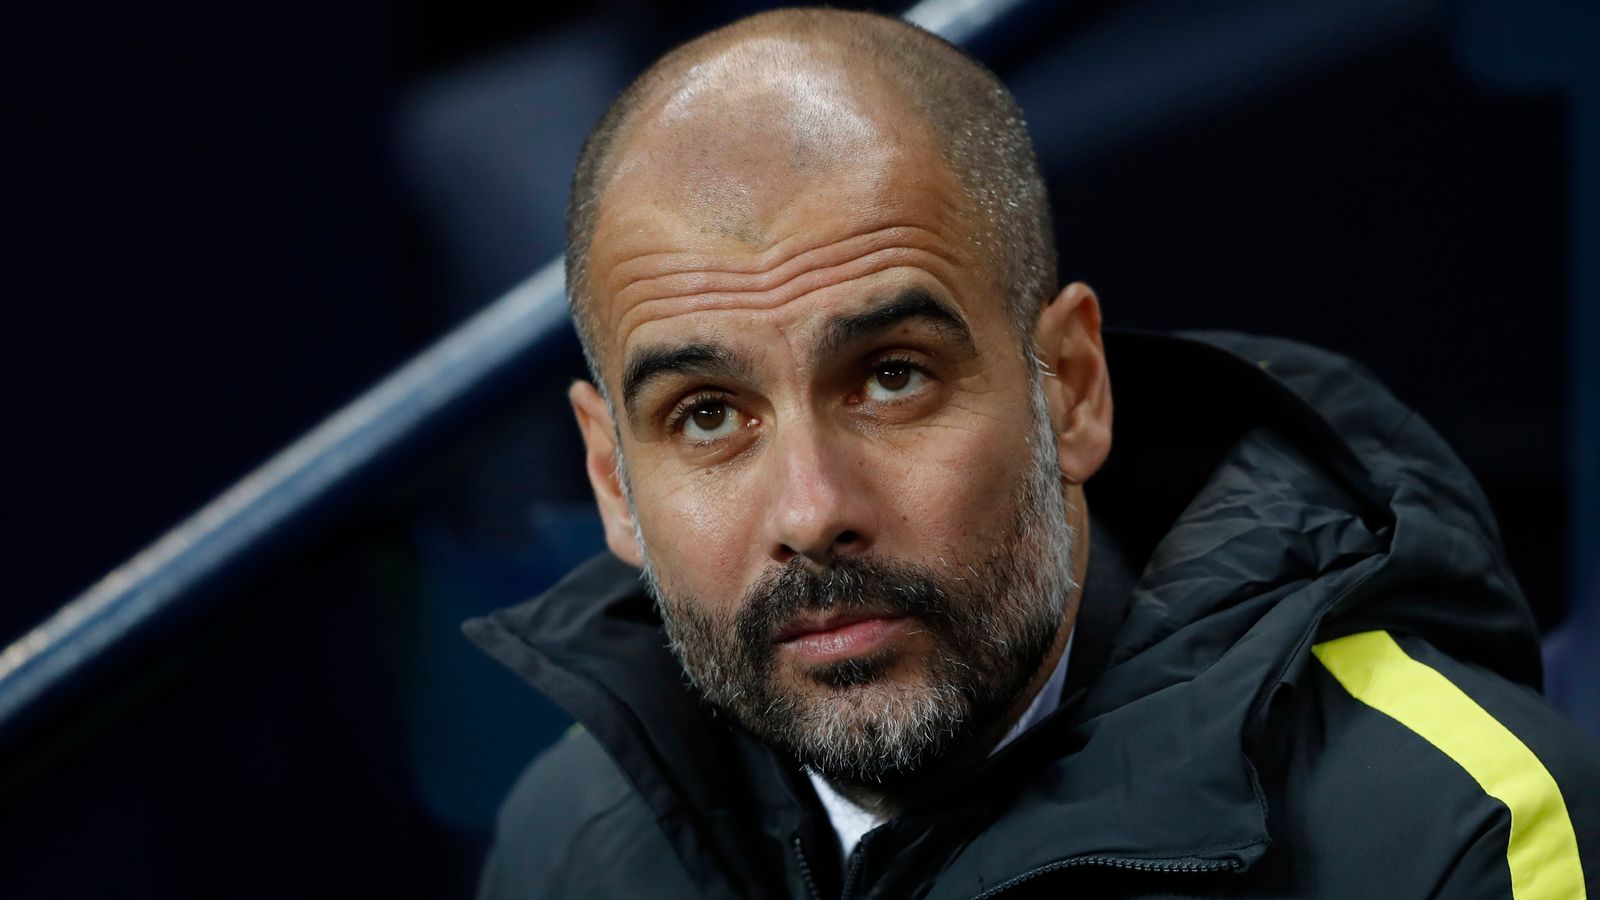 Pep Guardiola warns stars 'you have to be careful' on social media after burglary at Jack Grealish mansion